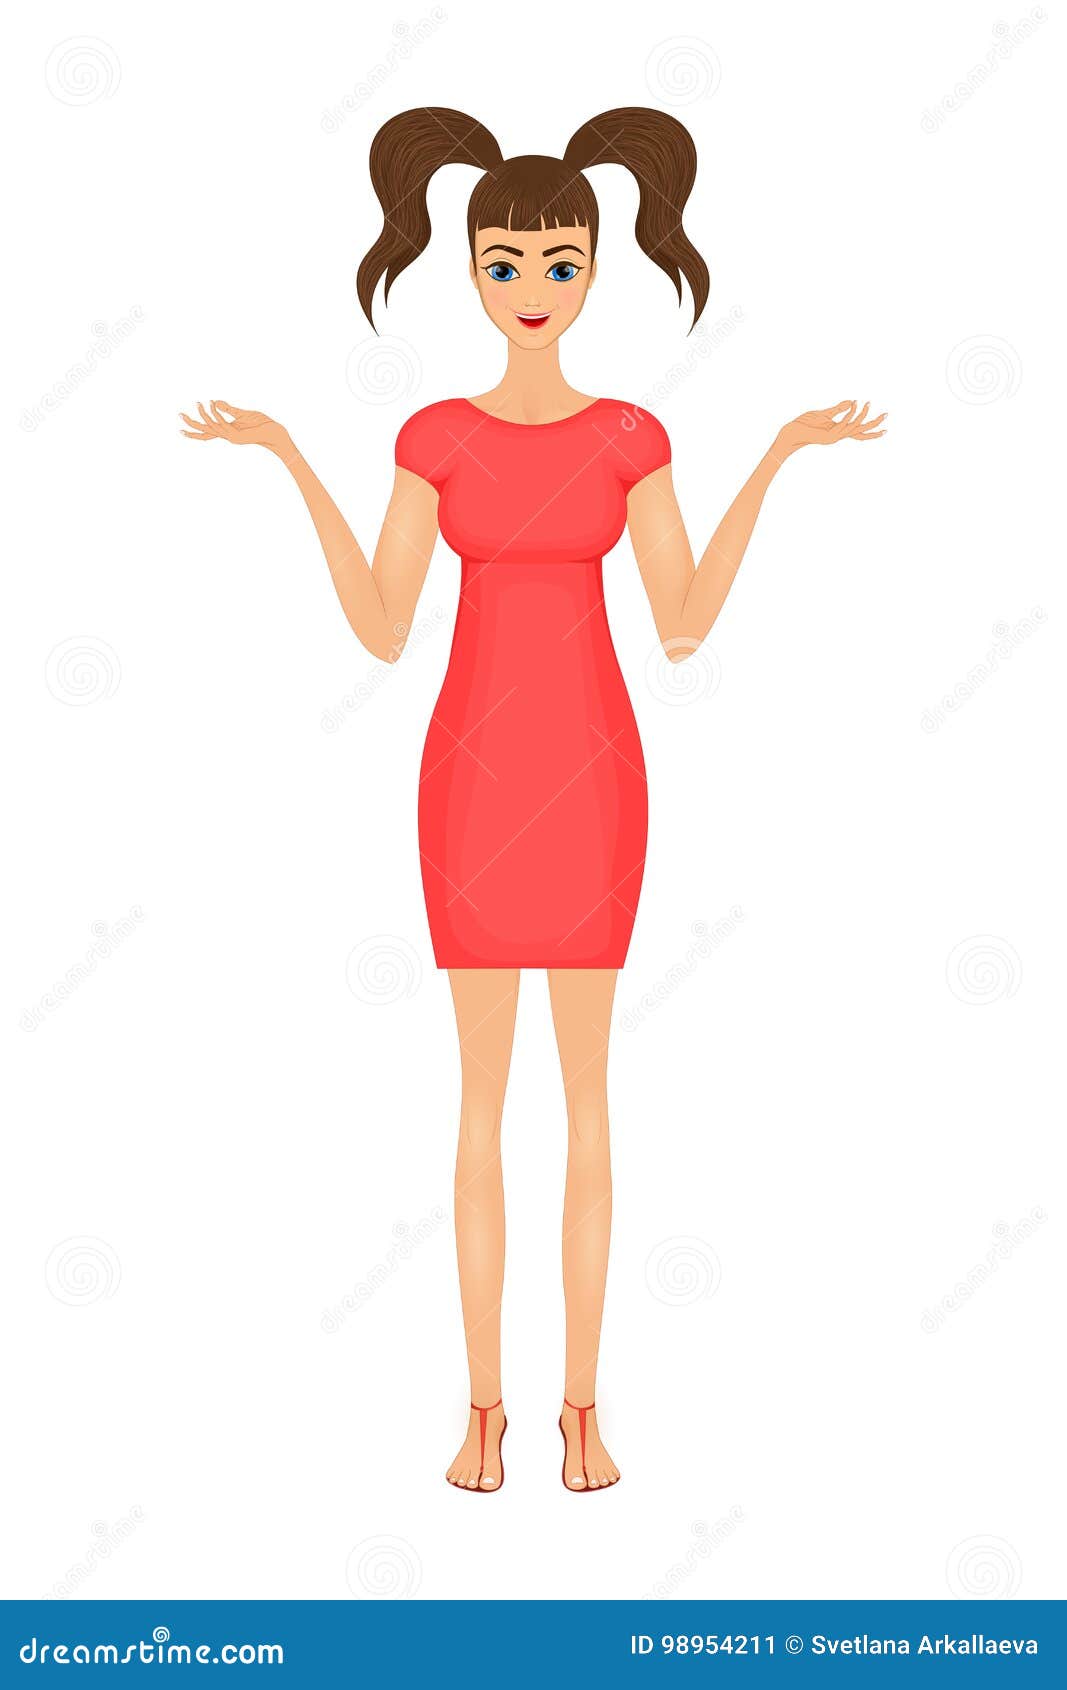 Illustration of Cute Cartoon Business Woman in a Red Dress Stock Vector ...